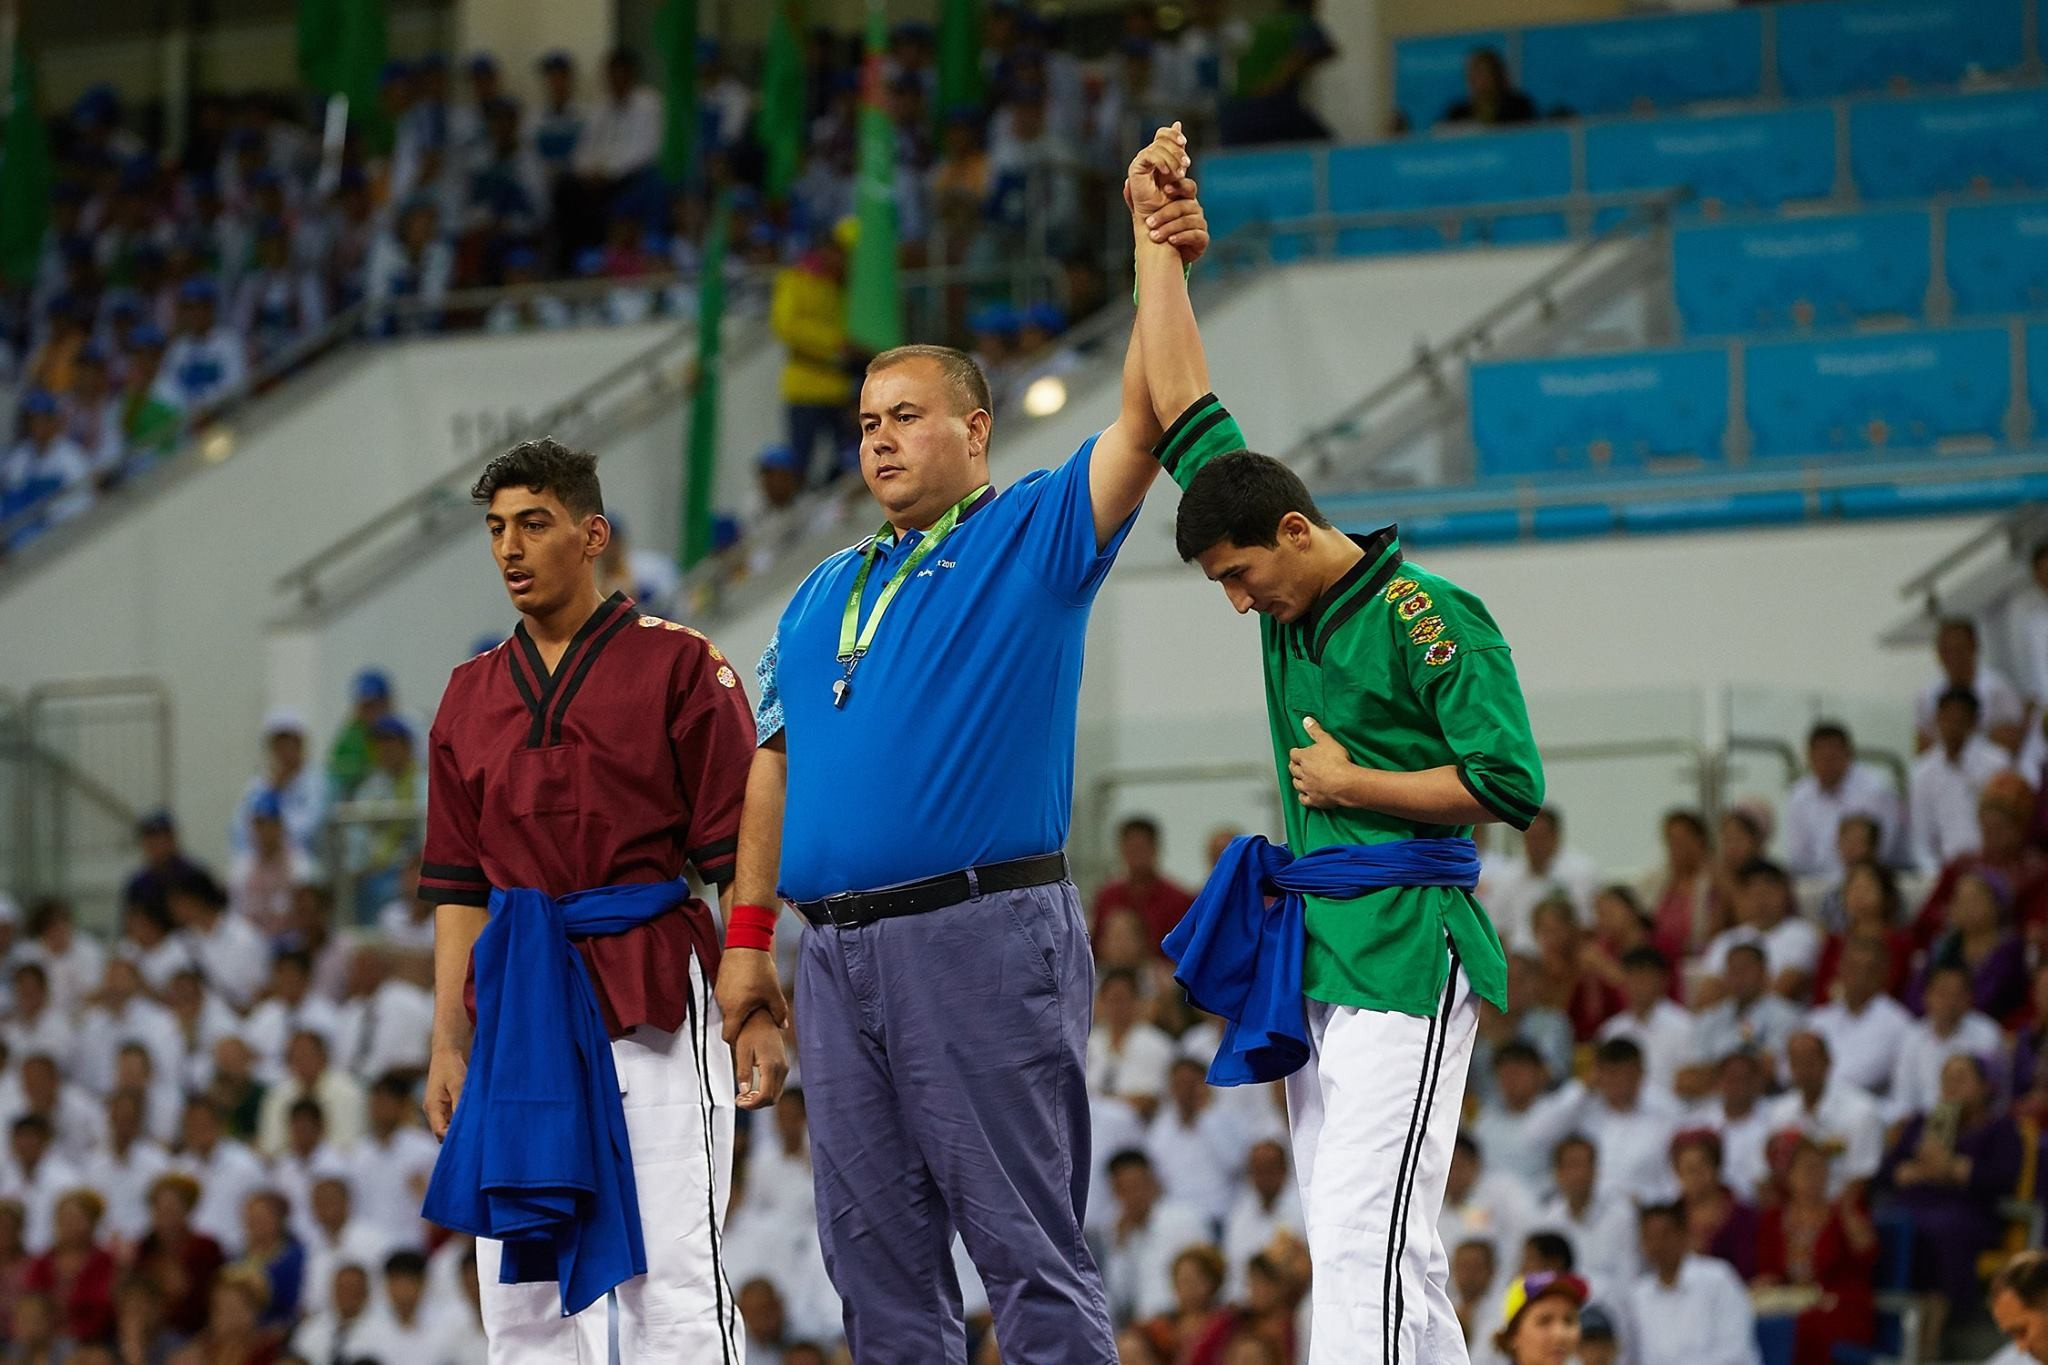 Home nation Turkmenistan dominated the opening day of traditional wrestling competition at Ashgabat 2017 ©Ashgabat 2017/Facebook